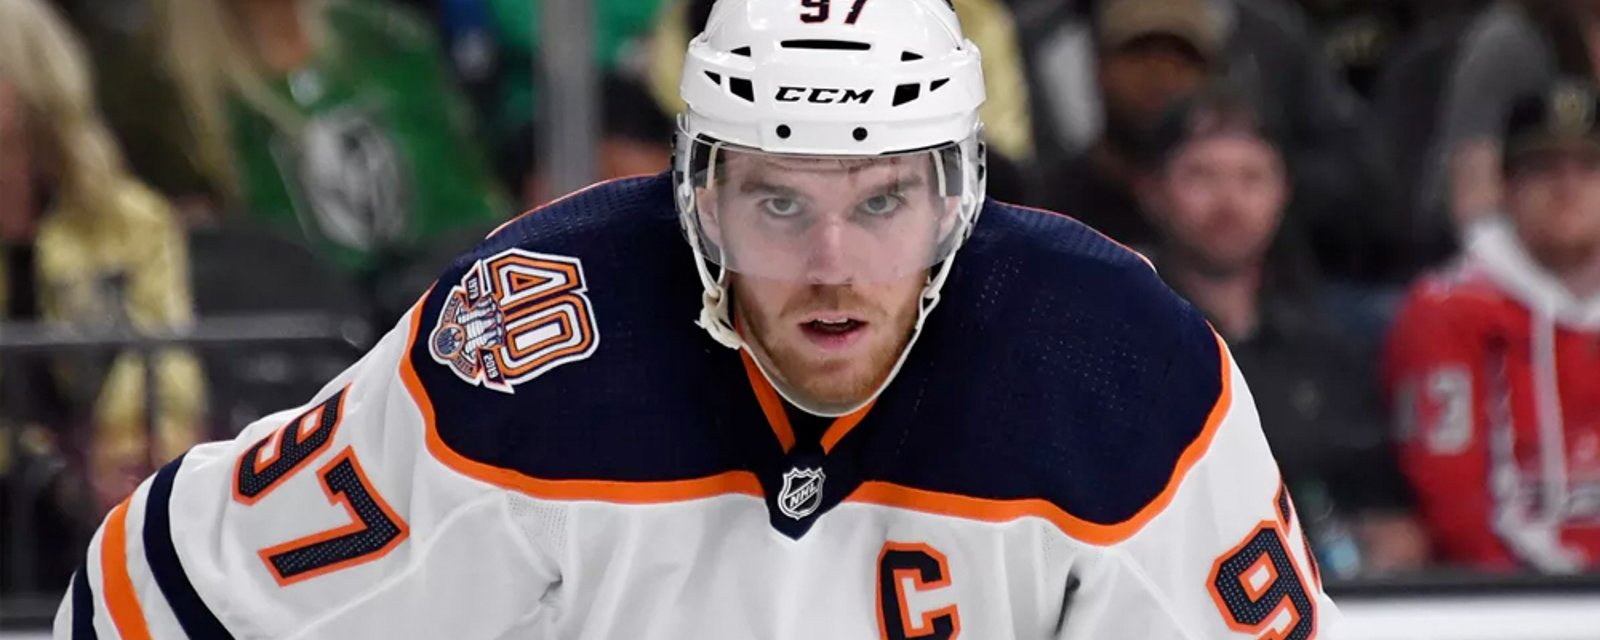 Connor McDavid issues a statement, fans immediately attack him